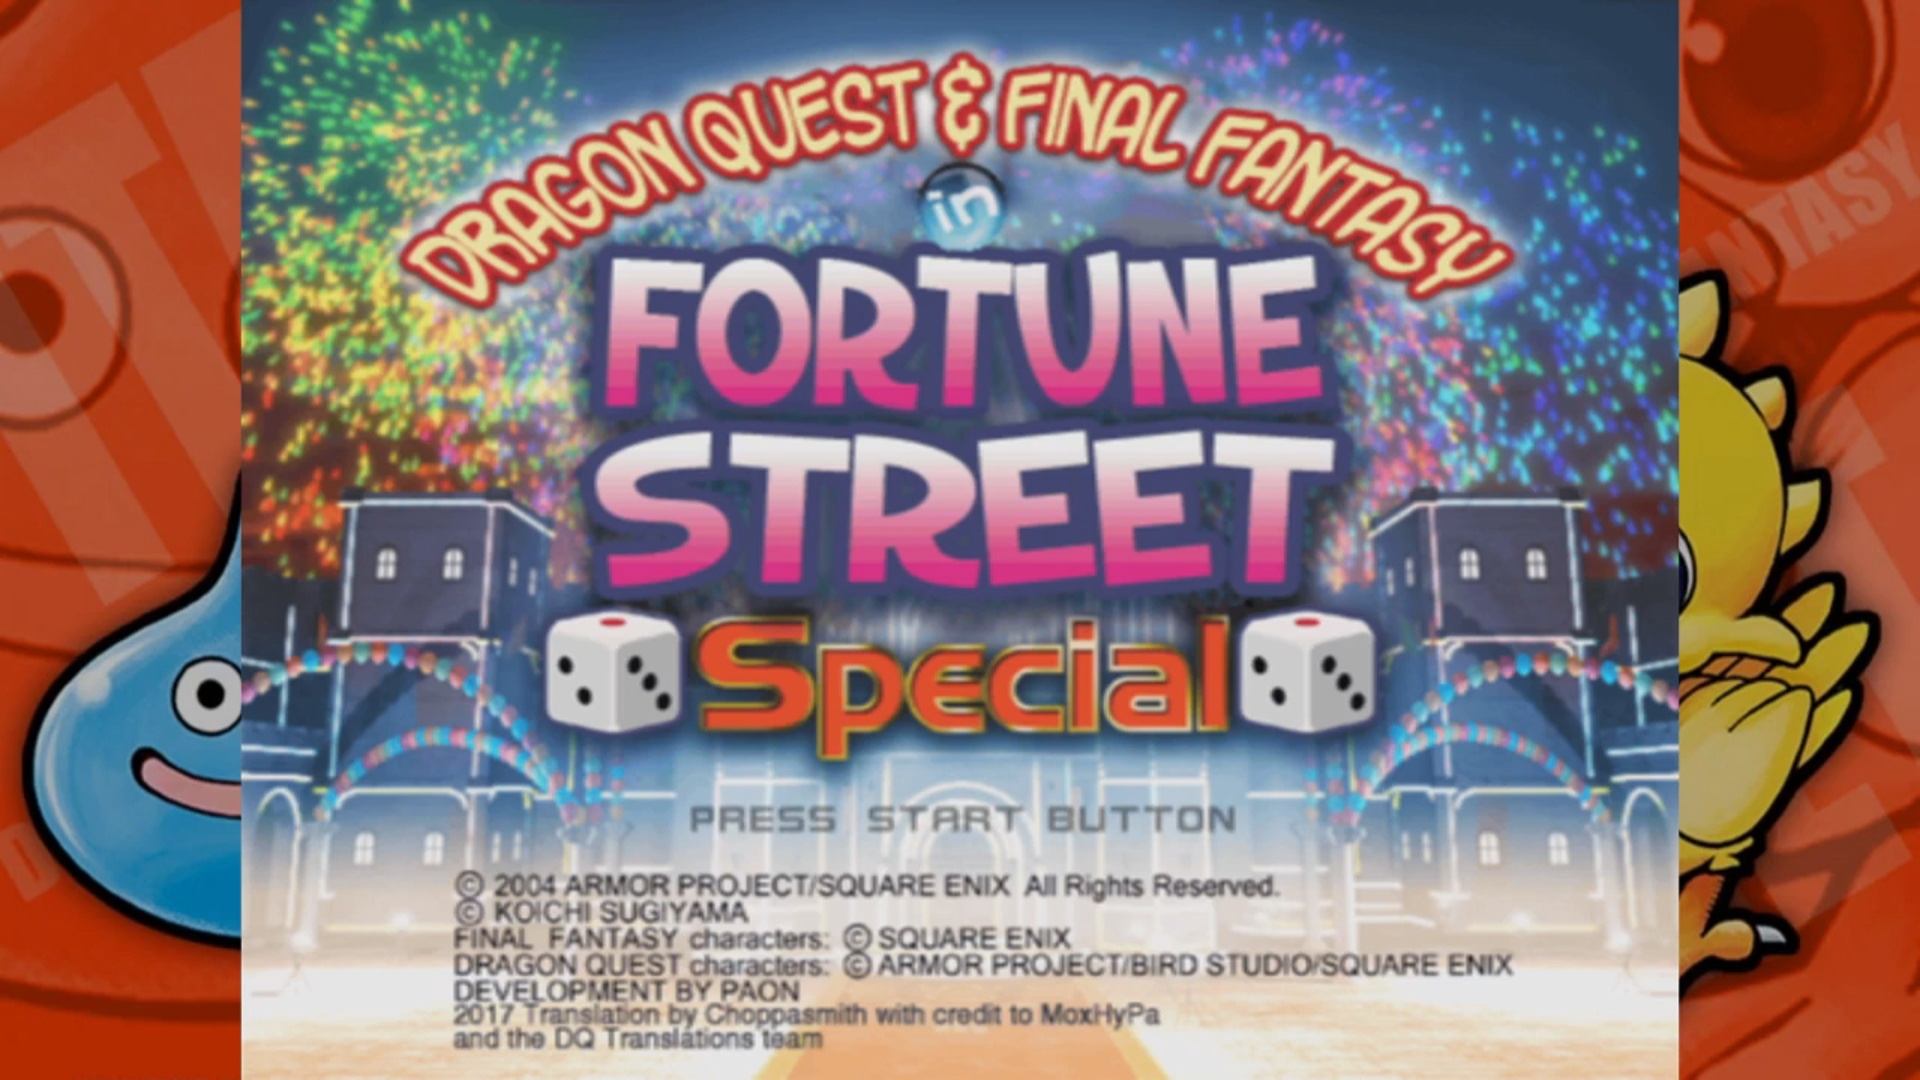 fortune street special yggdrasil 4  cant we get bianca thunderdome